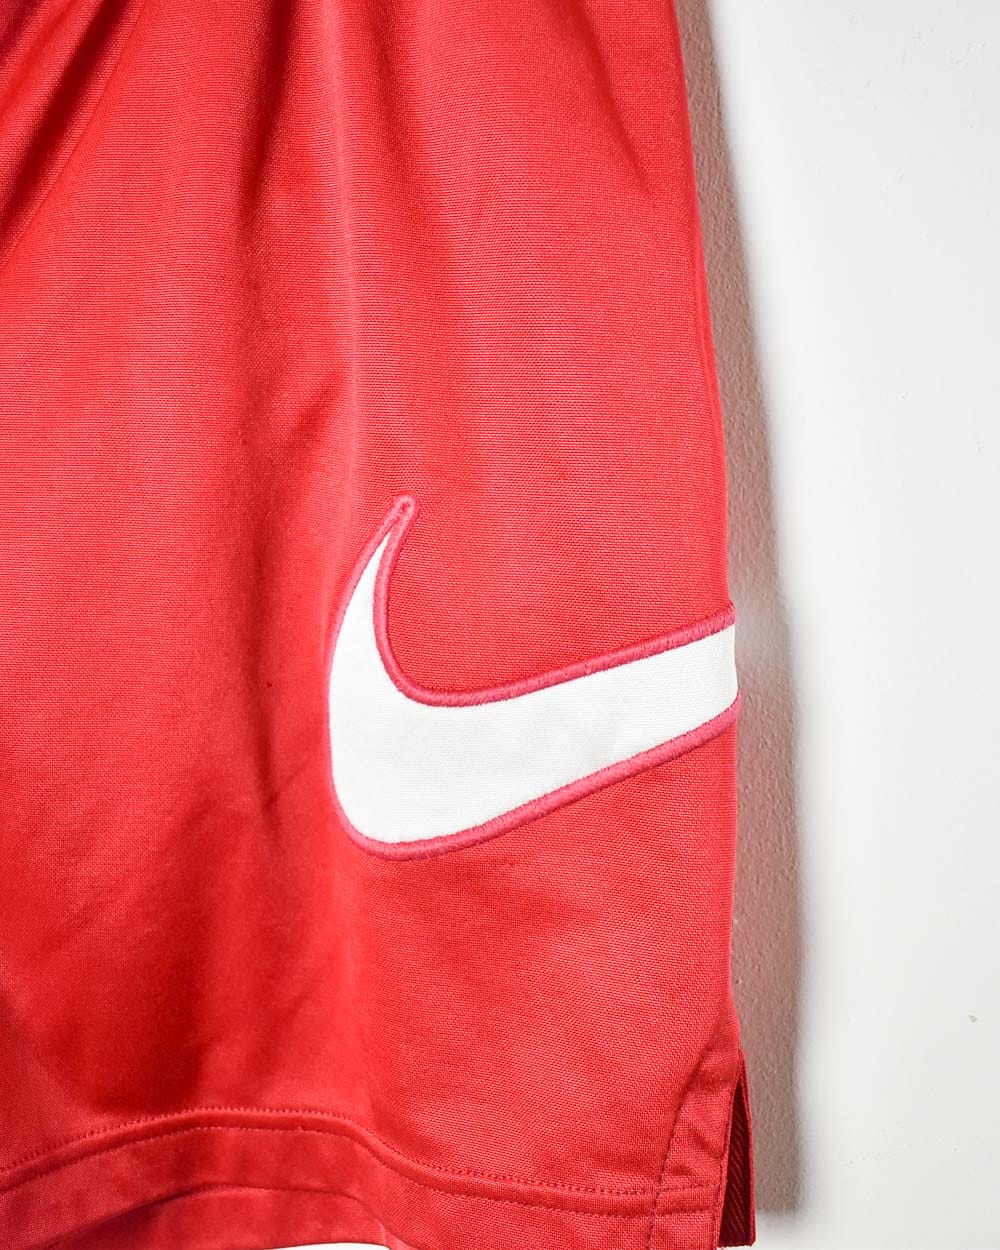 Red Nike Shorts - Small